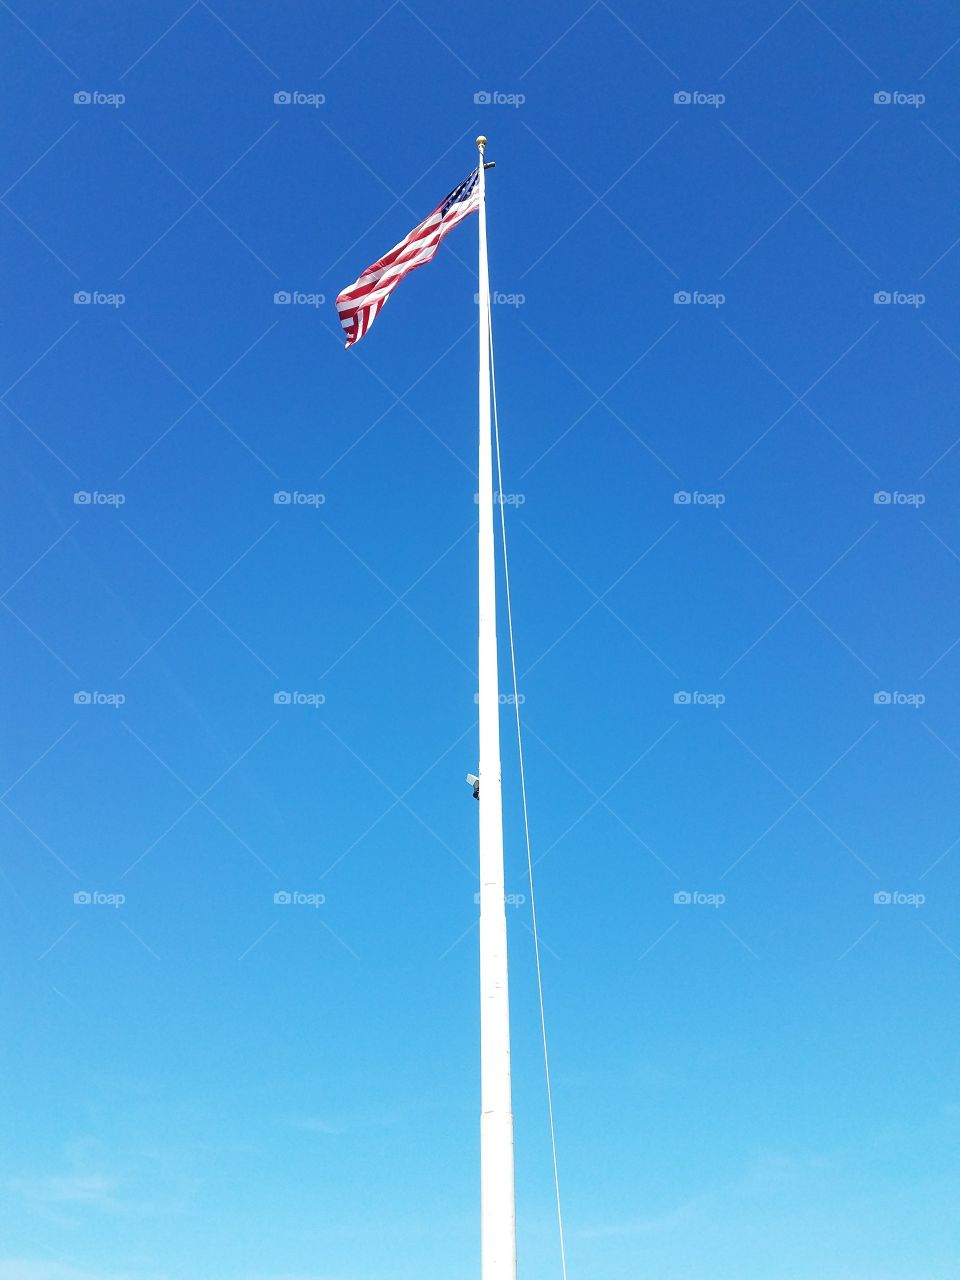 The American flag 